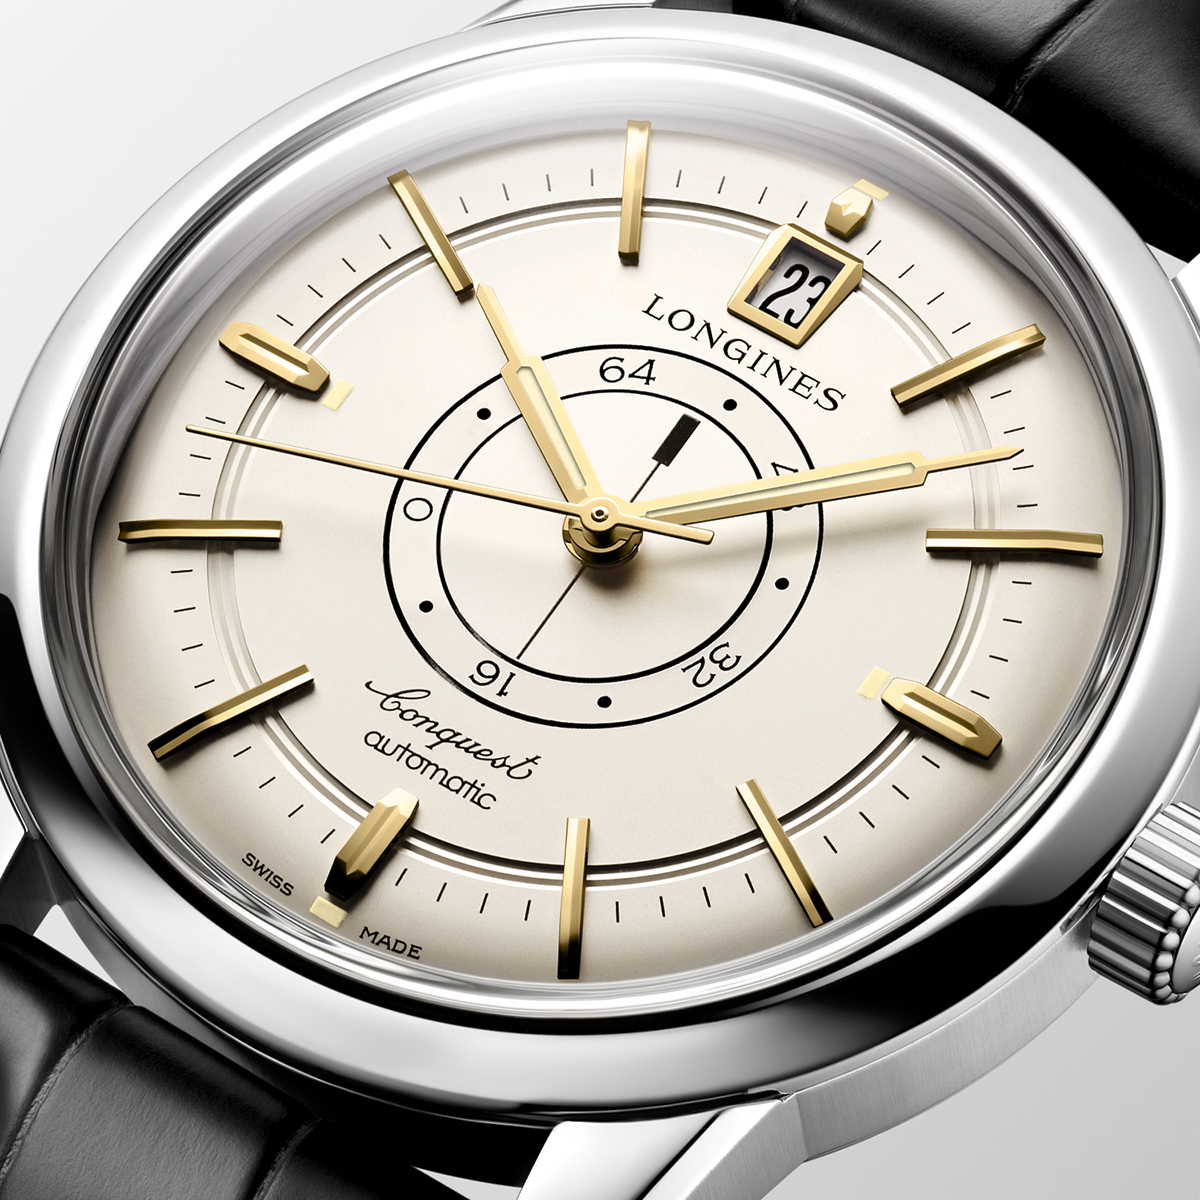 Cortina-Watch-Longines-Conquest-Heritage-Central-Power-Reserve-L1-648-4-78-2.jpg